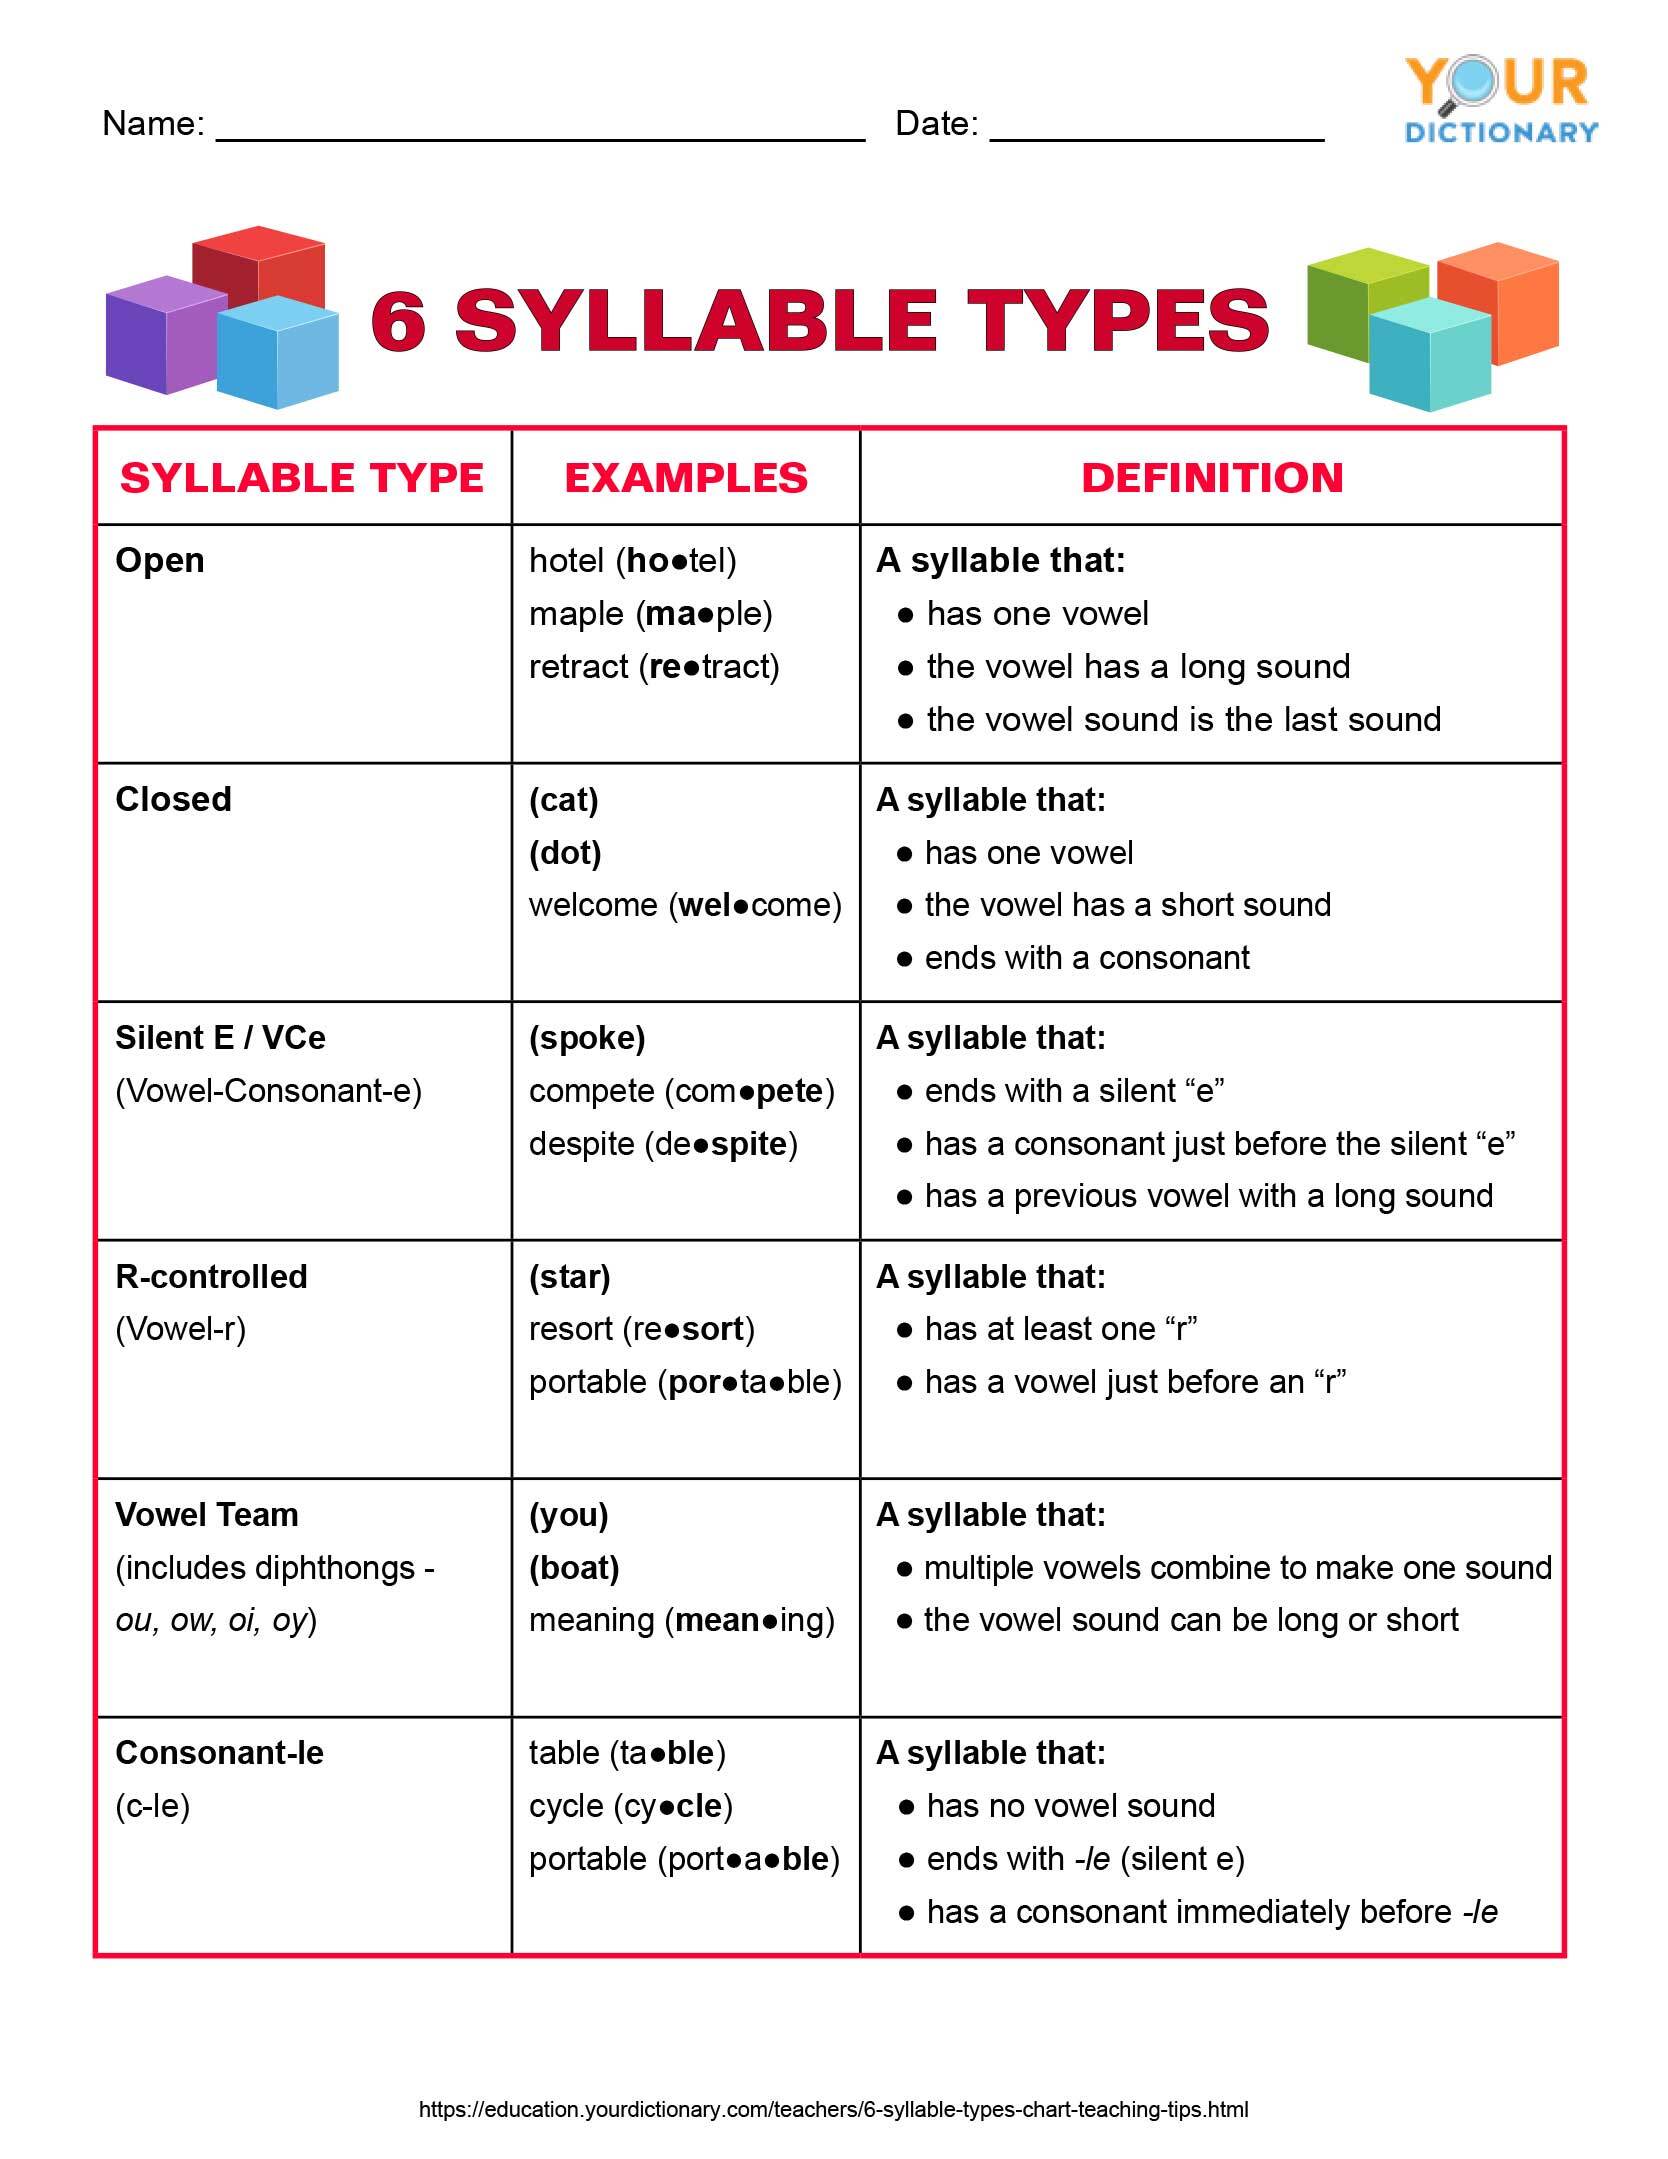 6 syllable types chart